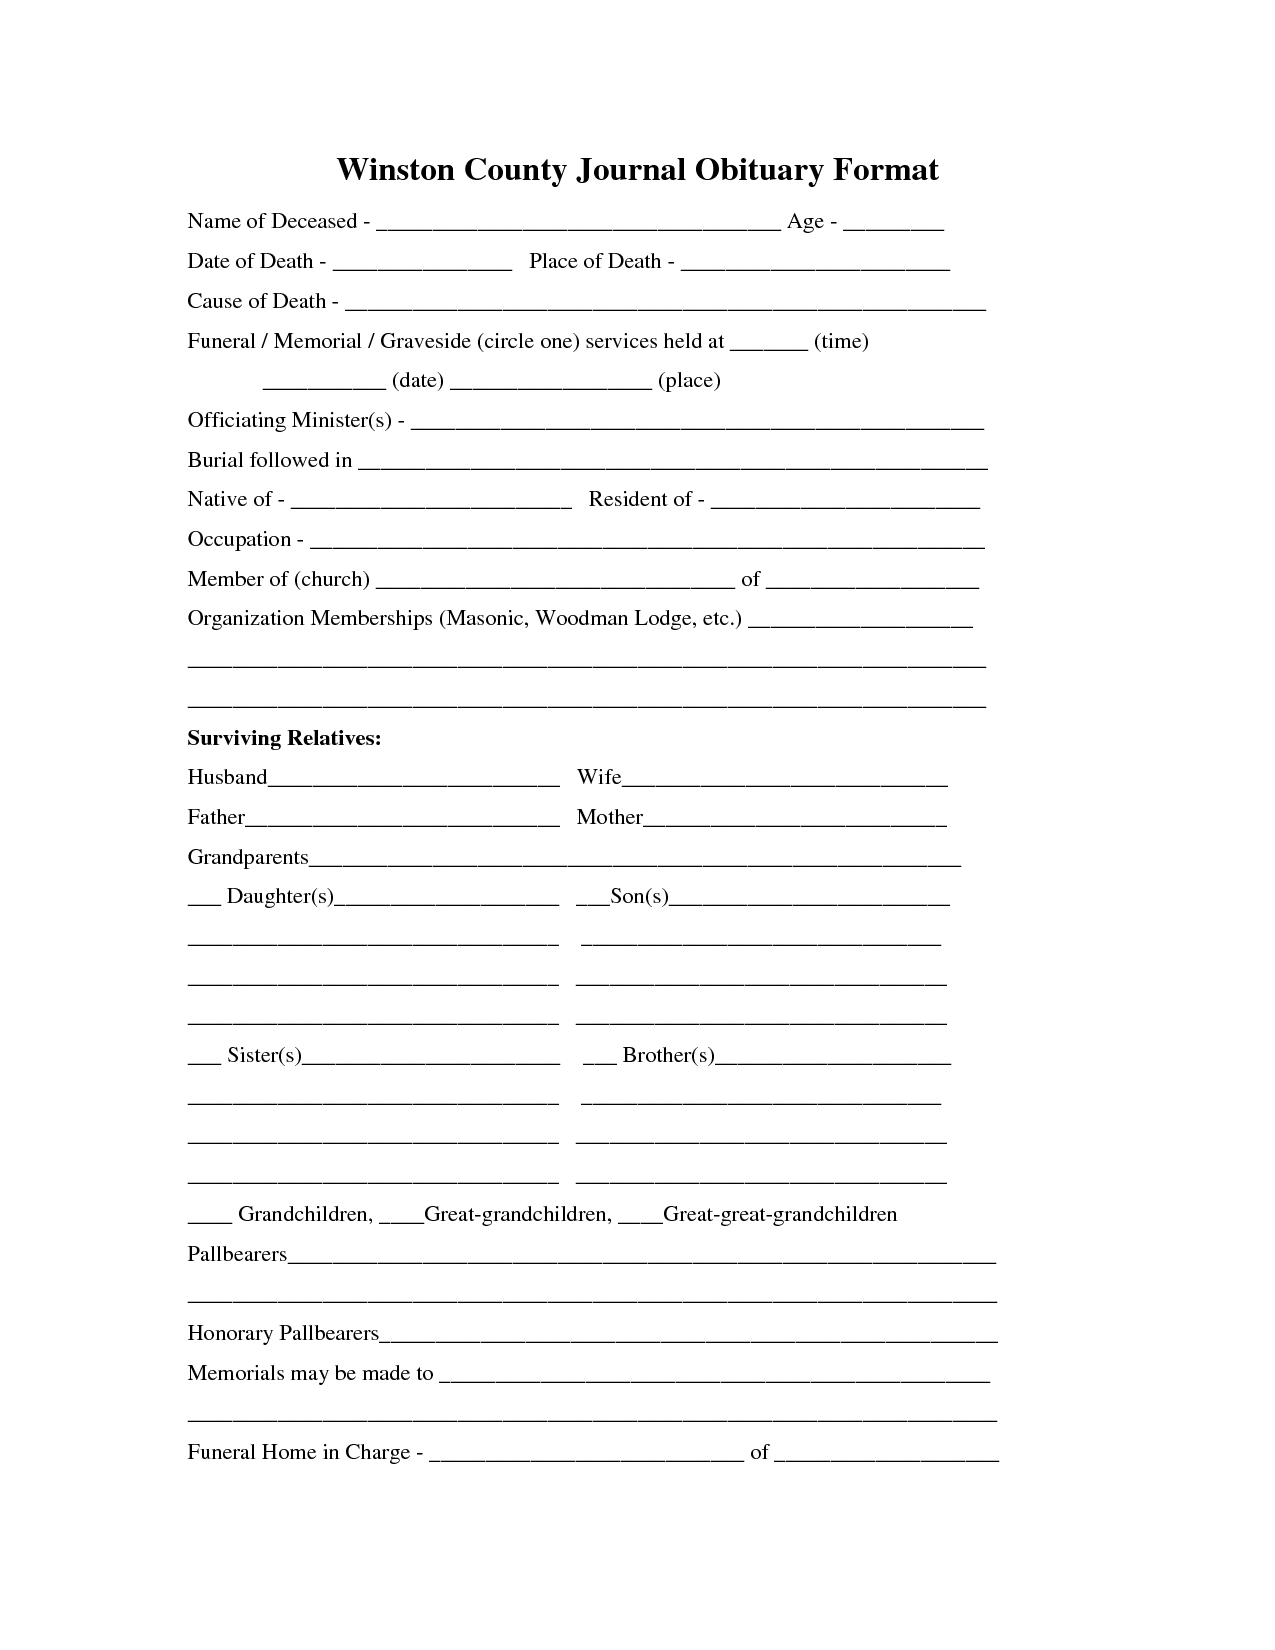 Printable Obituary Template | Fill In The Blank Obituary Template - Free Printable Obituary